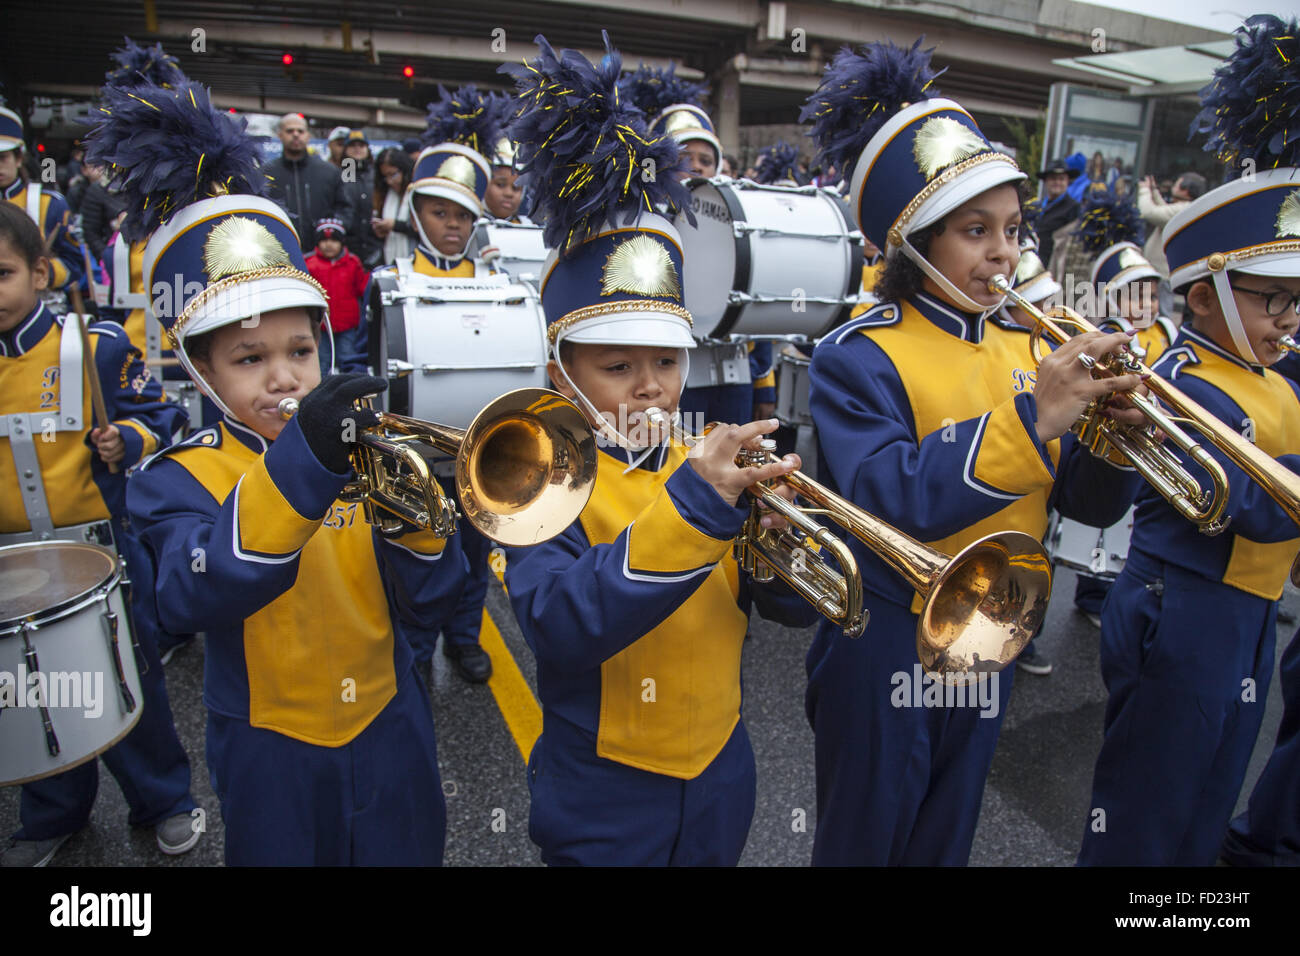 Elementary school marching band at the Three Kings Day Parade in Williamsburg, Brooklyn, NY. Stock Photo